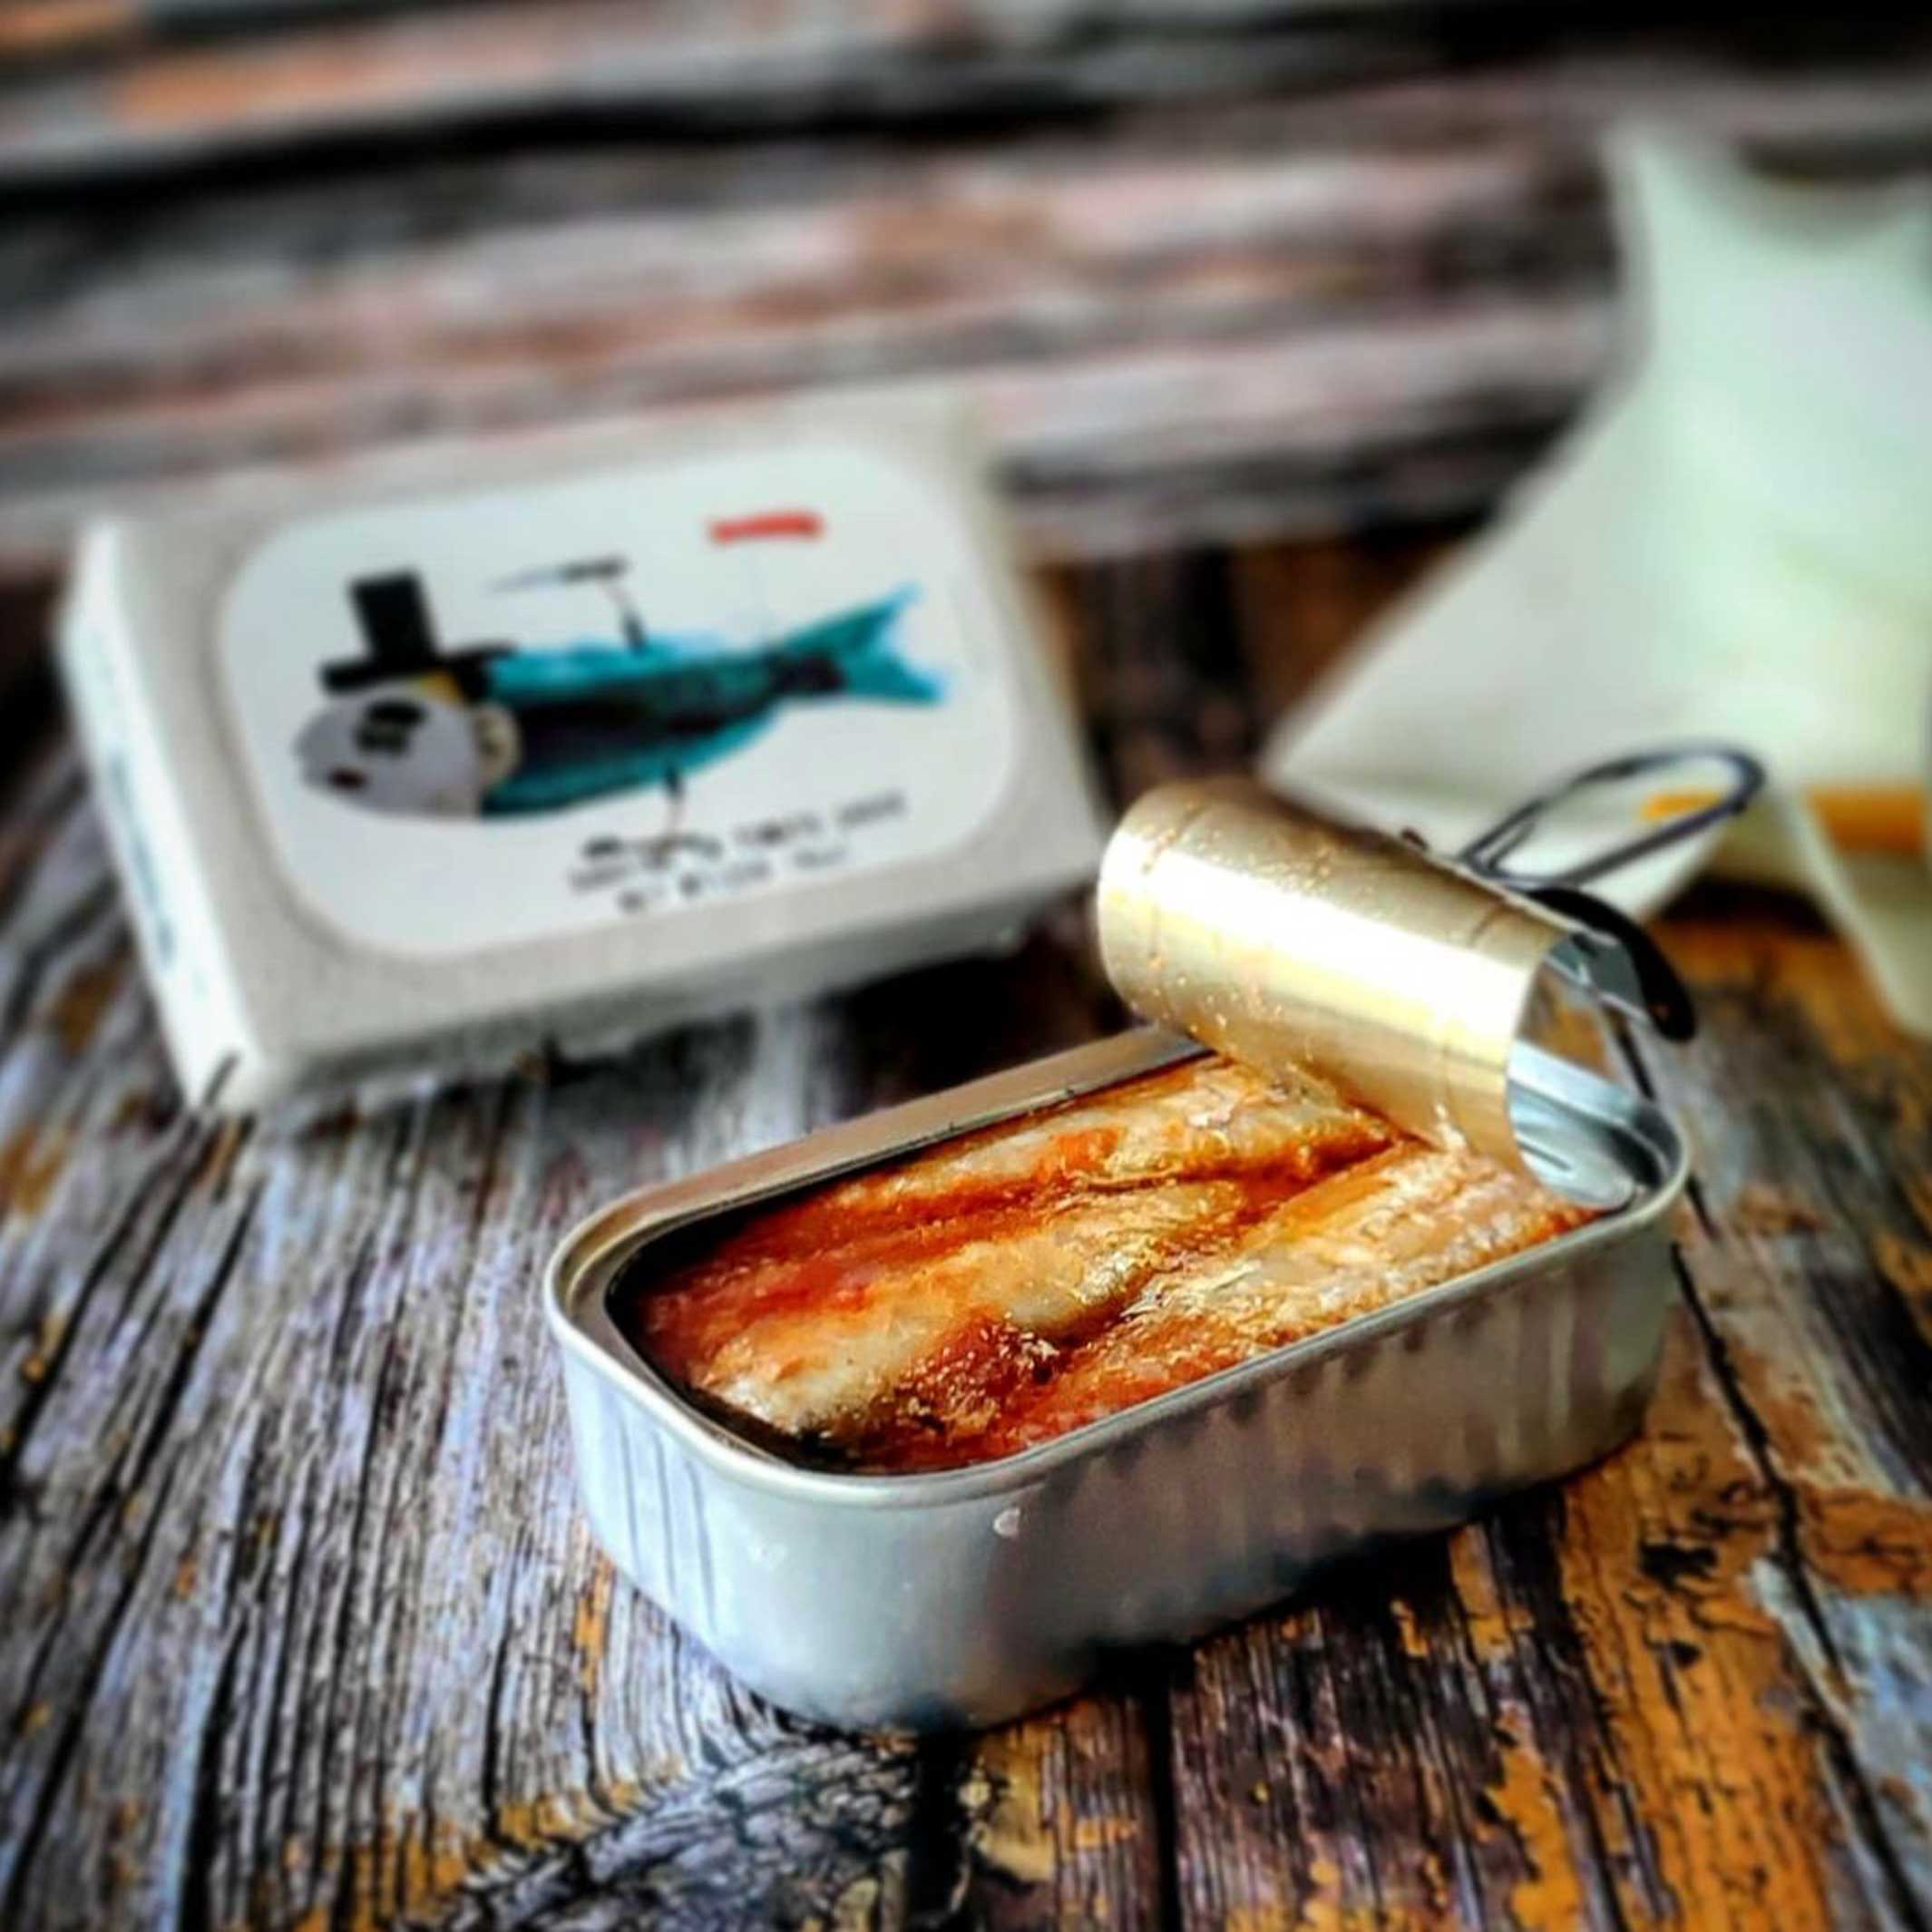 SARDINES in Tomato Sauce | CANNED GOURMET FISH | 125g | José Gourmet